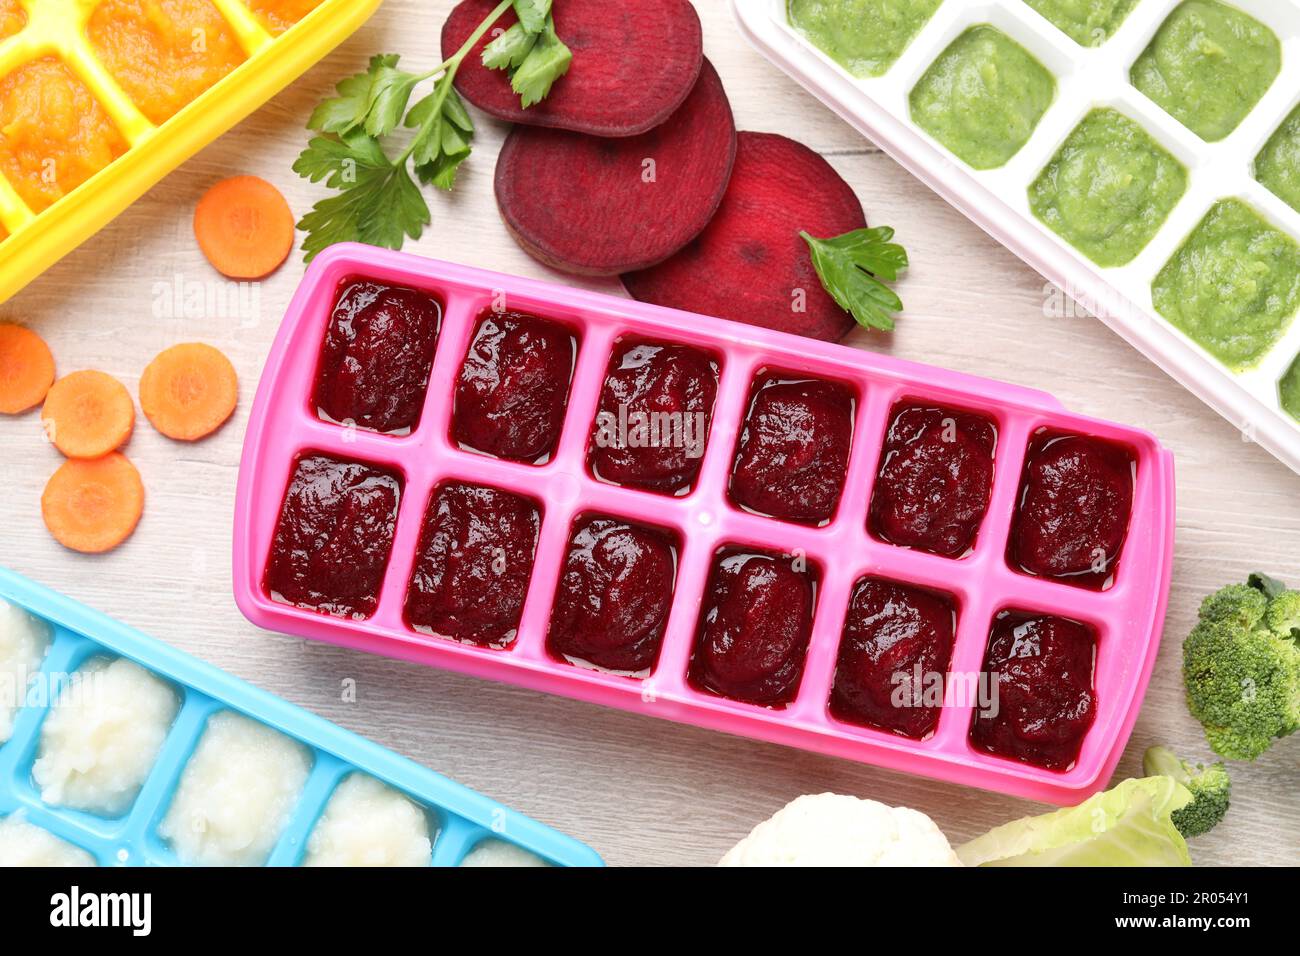 https://c8.alamy.com/comp/2R054Y1/different-purees-in-ice-cube-trays-and-ingredients-on-white-wooden-table-flat-lay-ready-for-freezing-2R054Y1.jpg